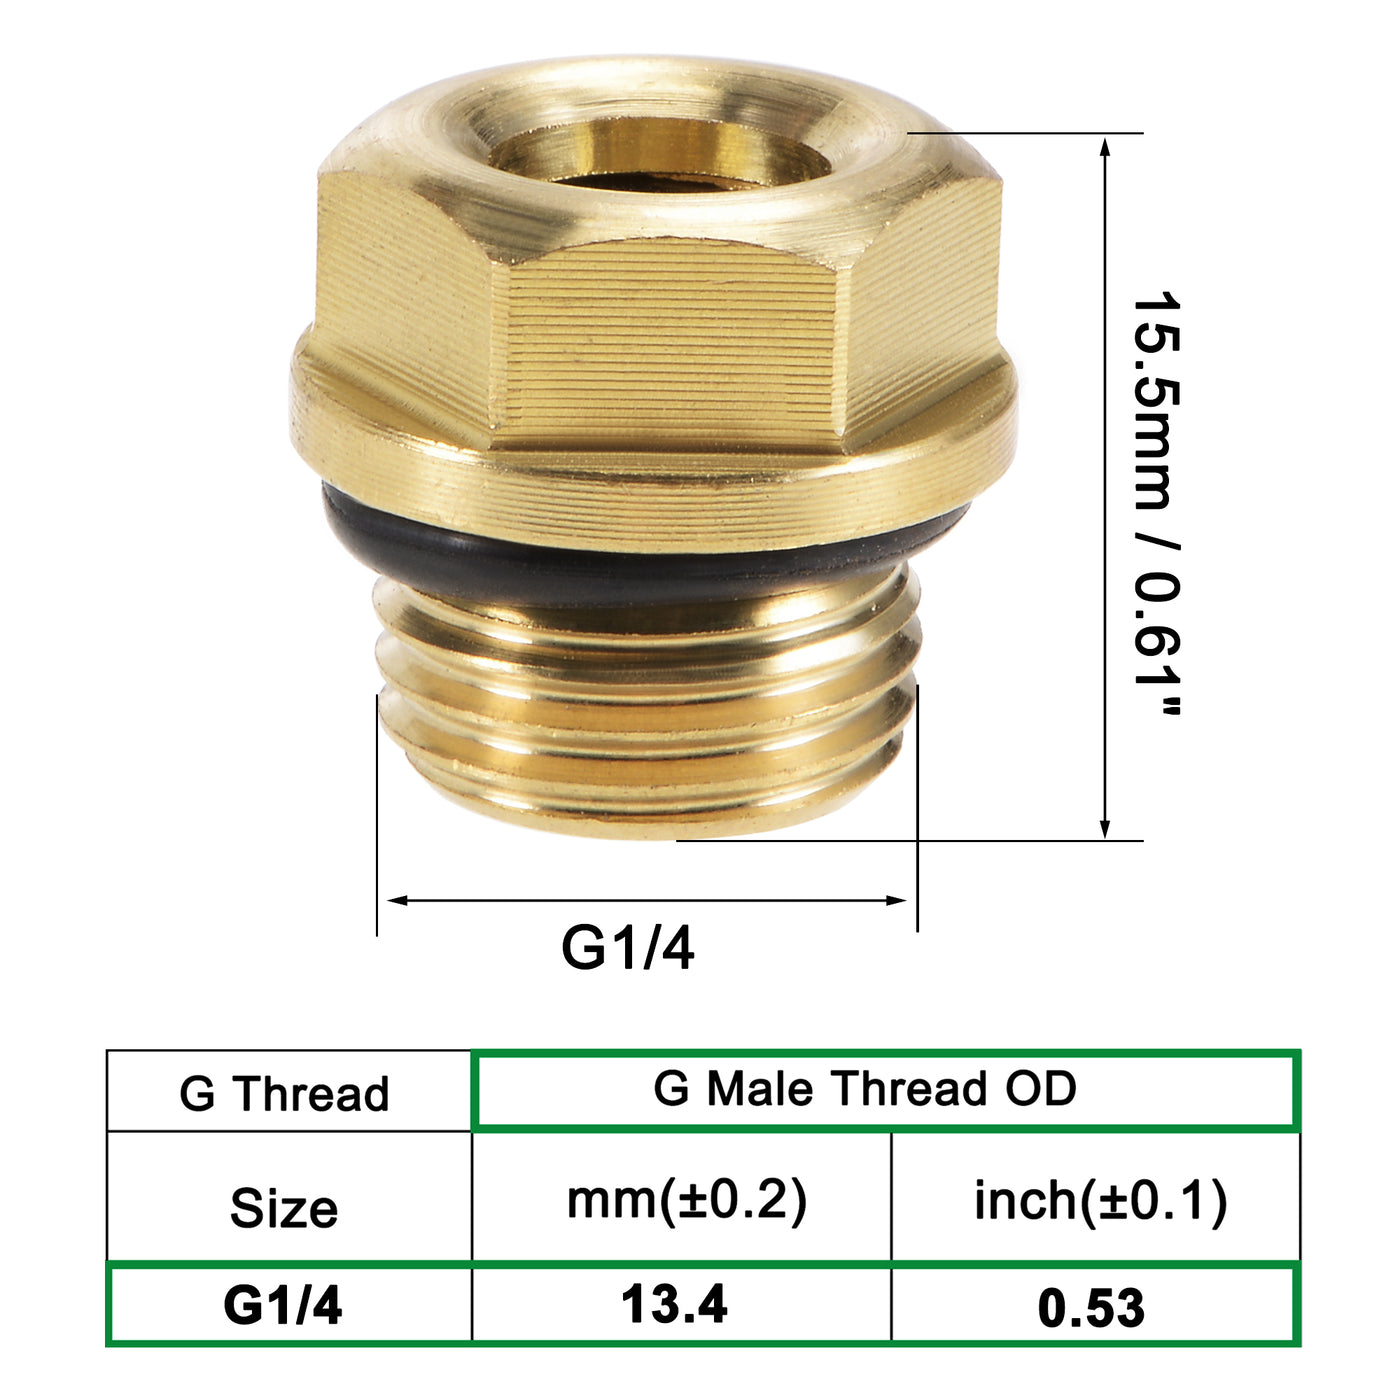 uxcell Uxcell Oil Liquid Level Gauge Sight Glass G1/4 Male Threaded Brass Air Compressor Fittings with O-Ring, Yellow